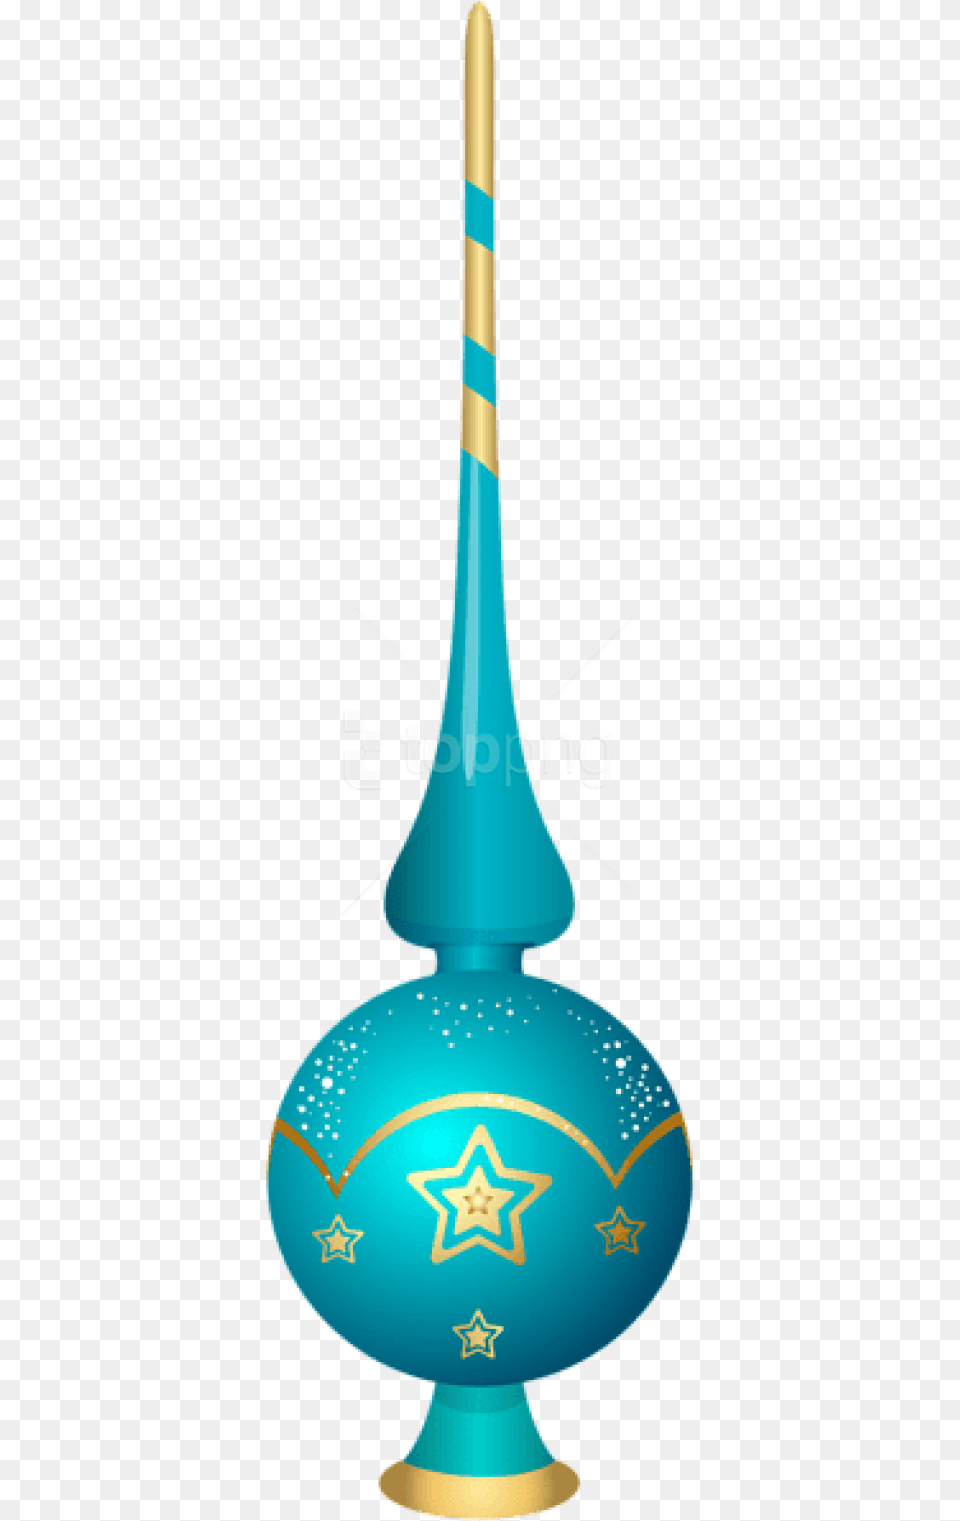 Blue Christmas Tree Top Ornament Christmas Tree Top, Astronomy, Outer Space Png